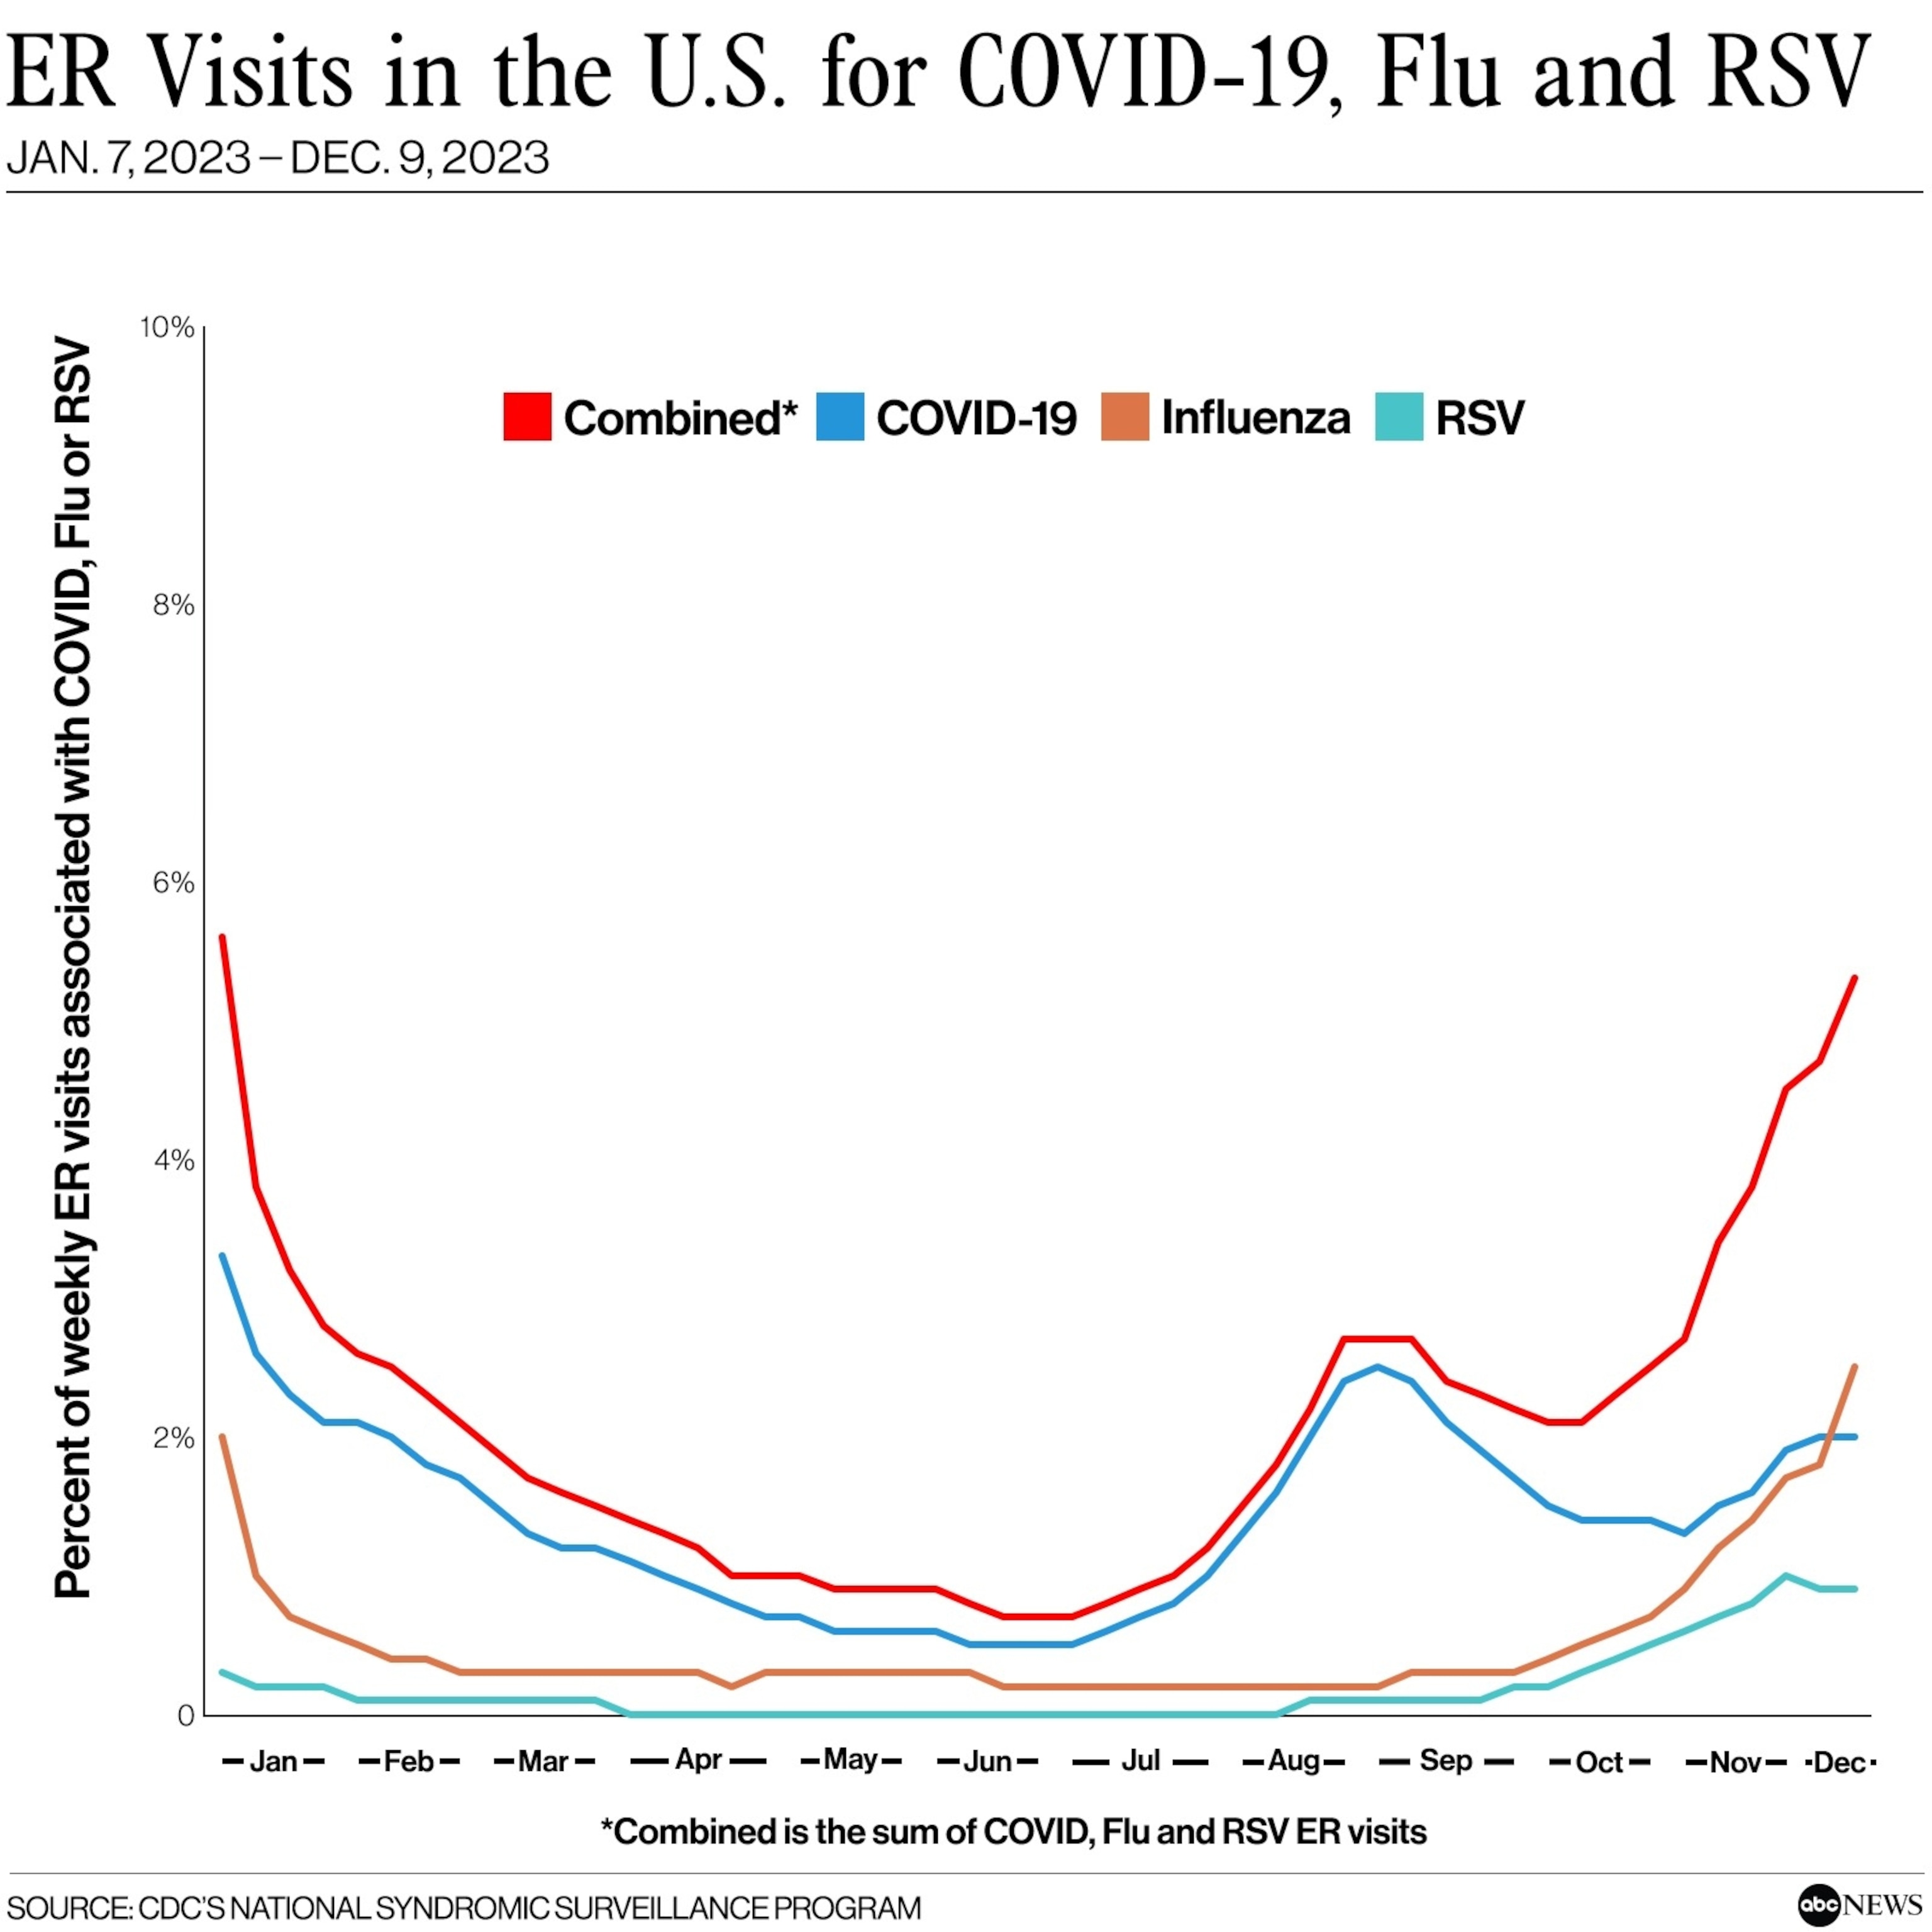 PHOTO: ER Visits in the U.S. for COVID-19, Flu and RSV